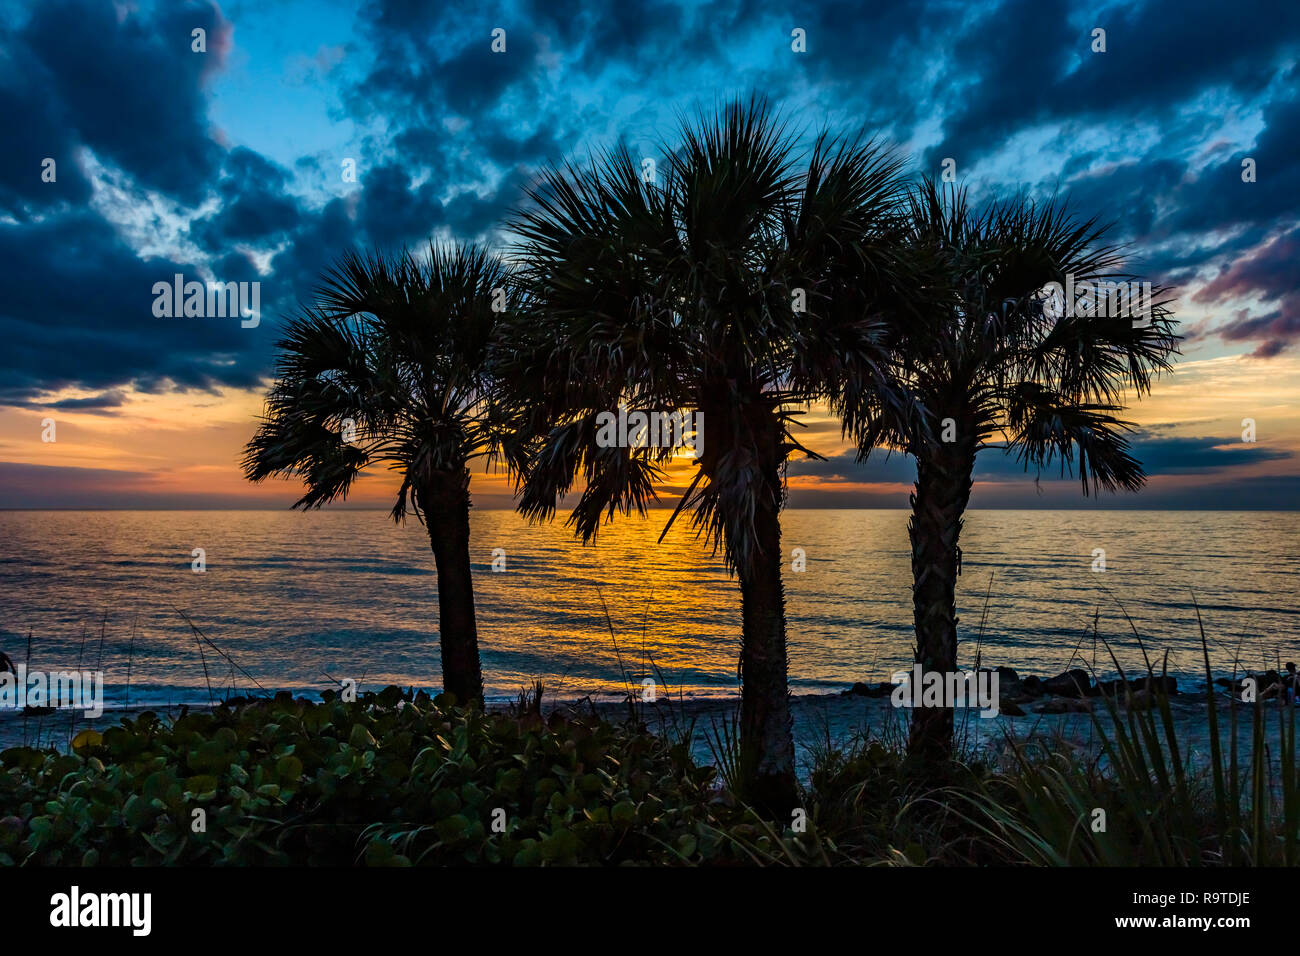 Palm trees silhoutted by  dramatic blue sky with dark clouds at sunset at Caspersen Beach on the Gulf of Mexico in Venice Florida Stock Photo